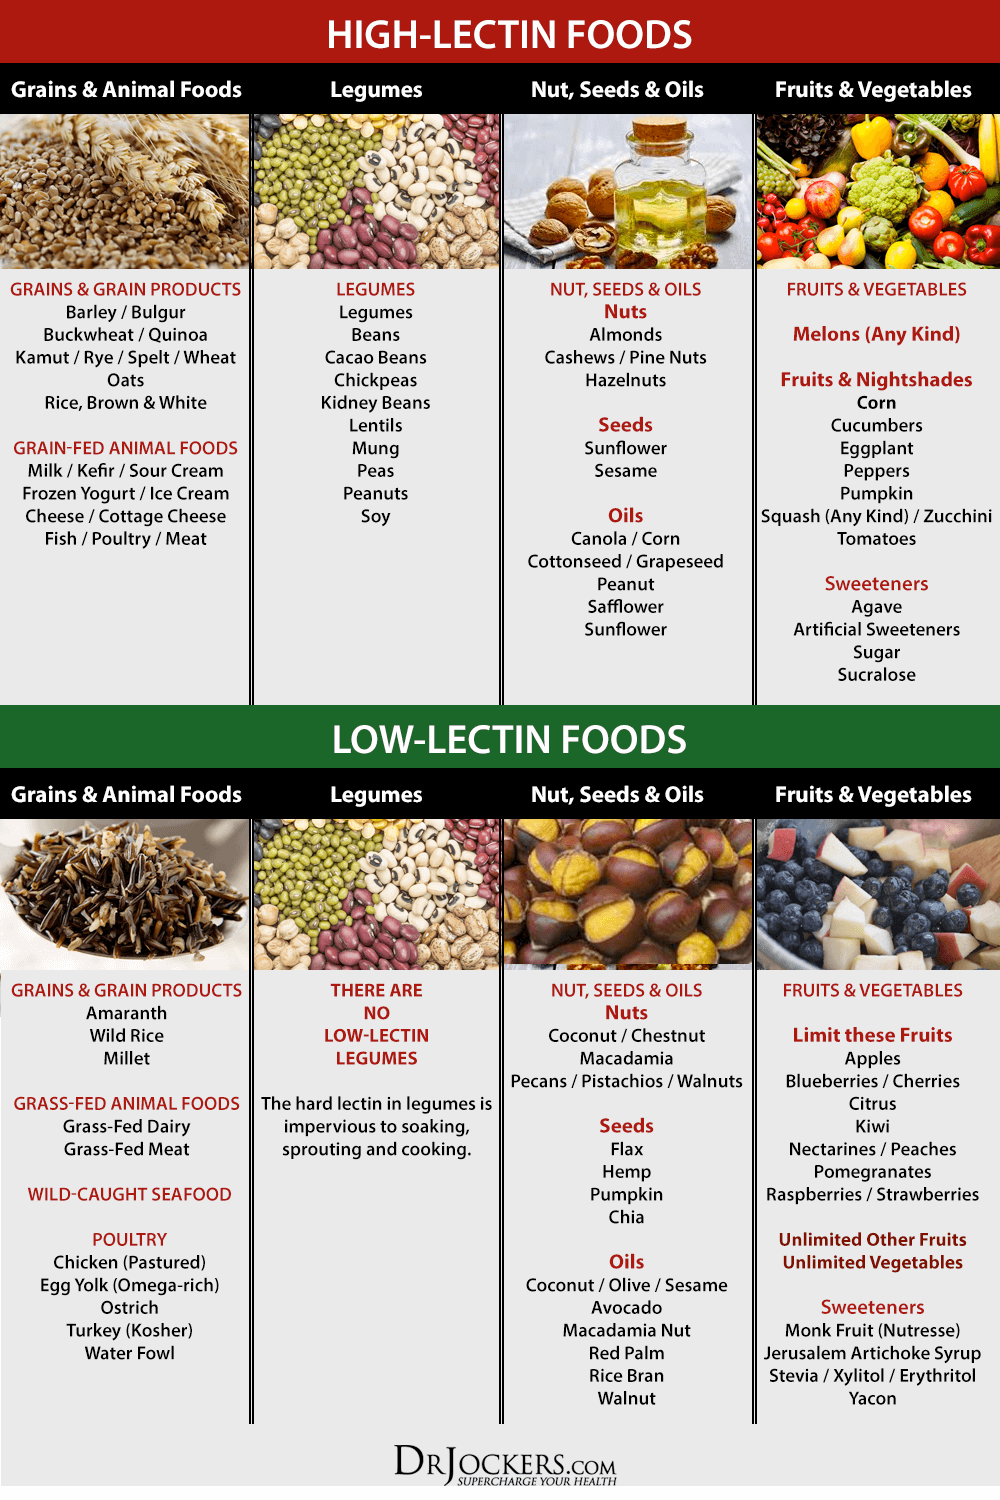 Lectins, Why You Should Avoid Lectins in Your Diet!